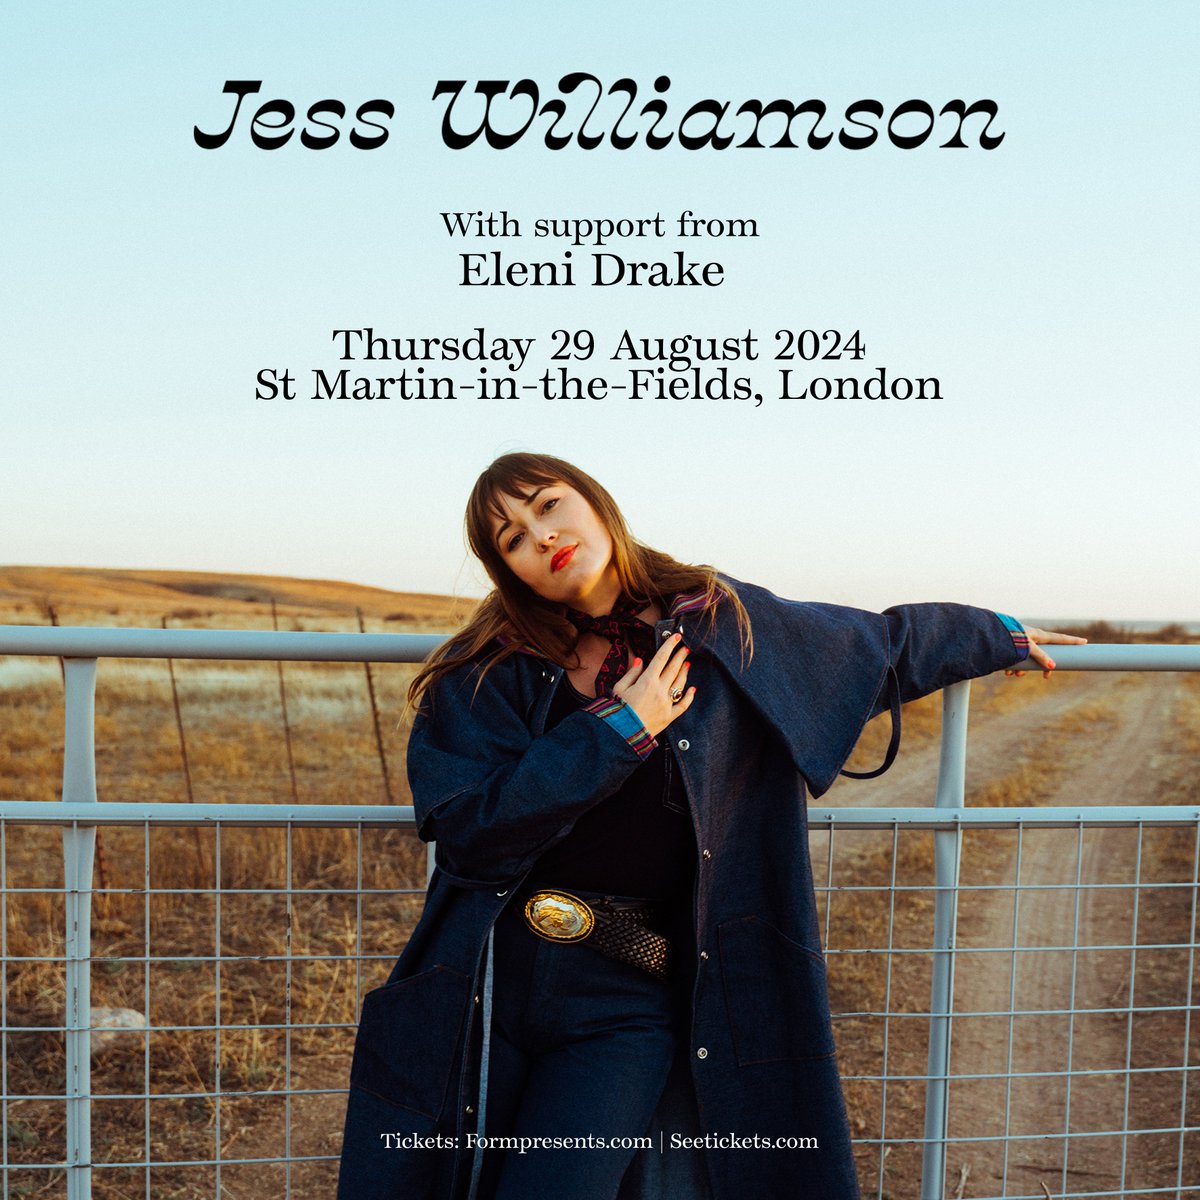 Texas-born singer-songwriter @jessswilliamson returns to London on 29th August for a special show at @smitf_london! With support from Eleni Drake. 🎟 Tickets on sale 10am Wednesday.